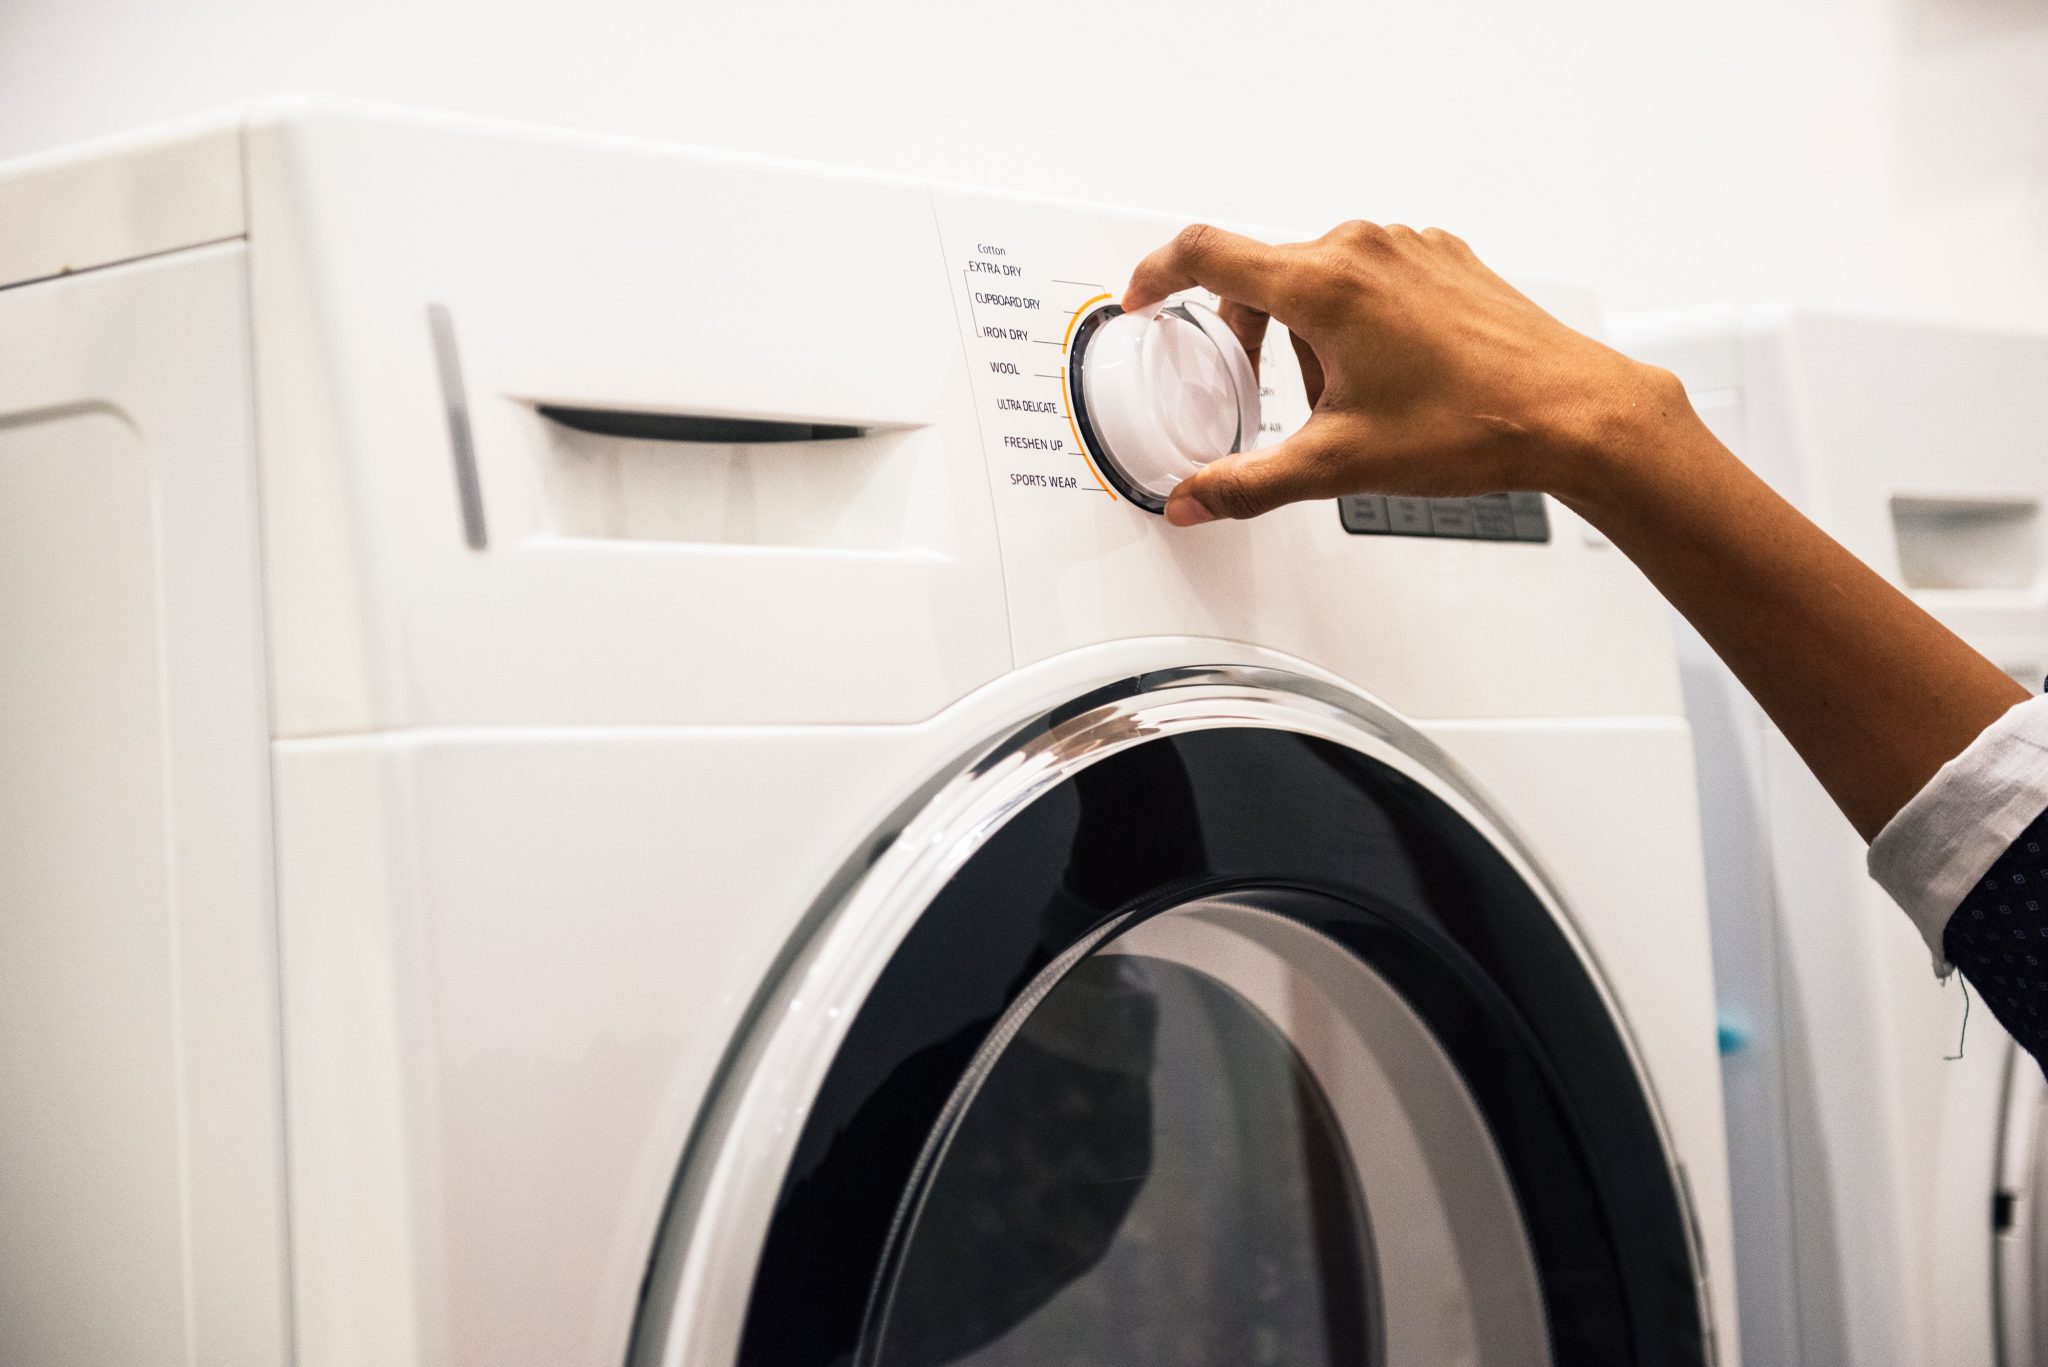 Sell Used Appliances: Top 33 Places That Buy Them